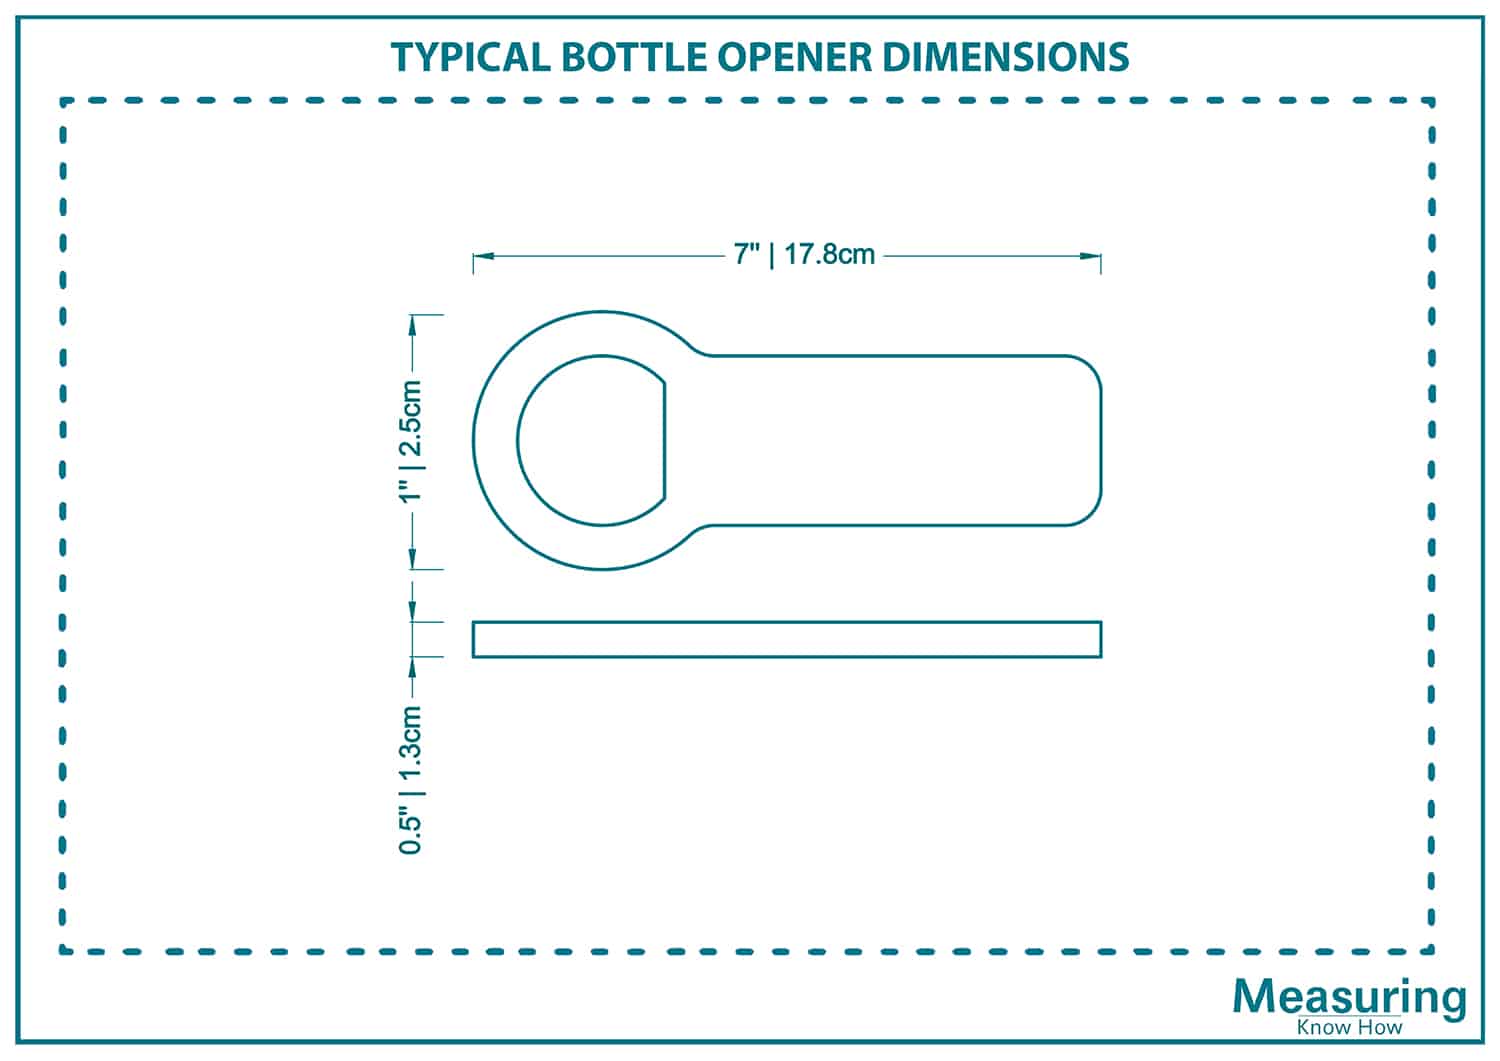 Typical bottle opener dimensions